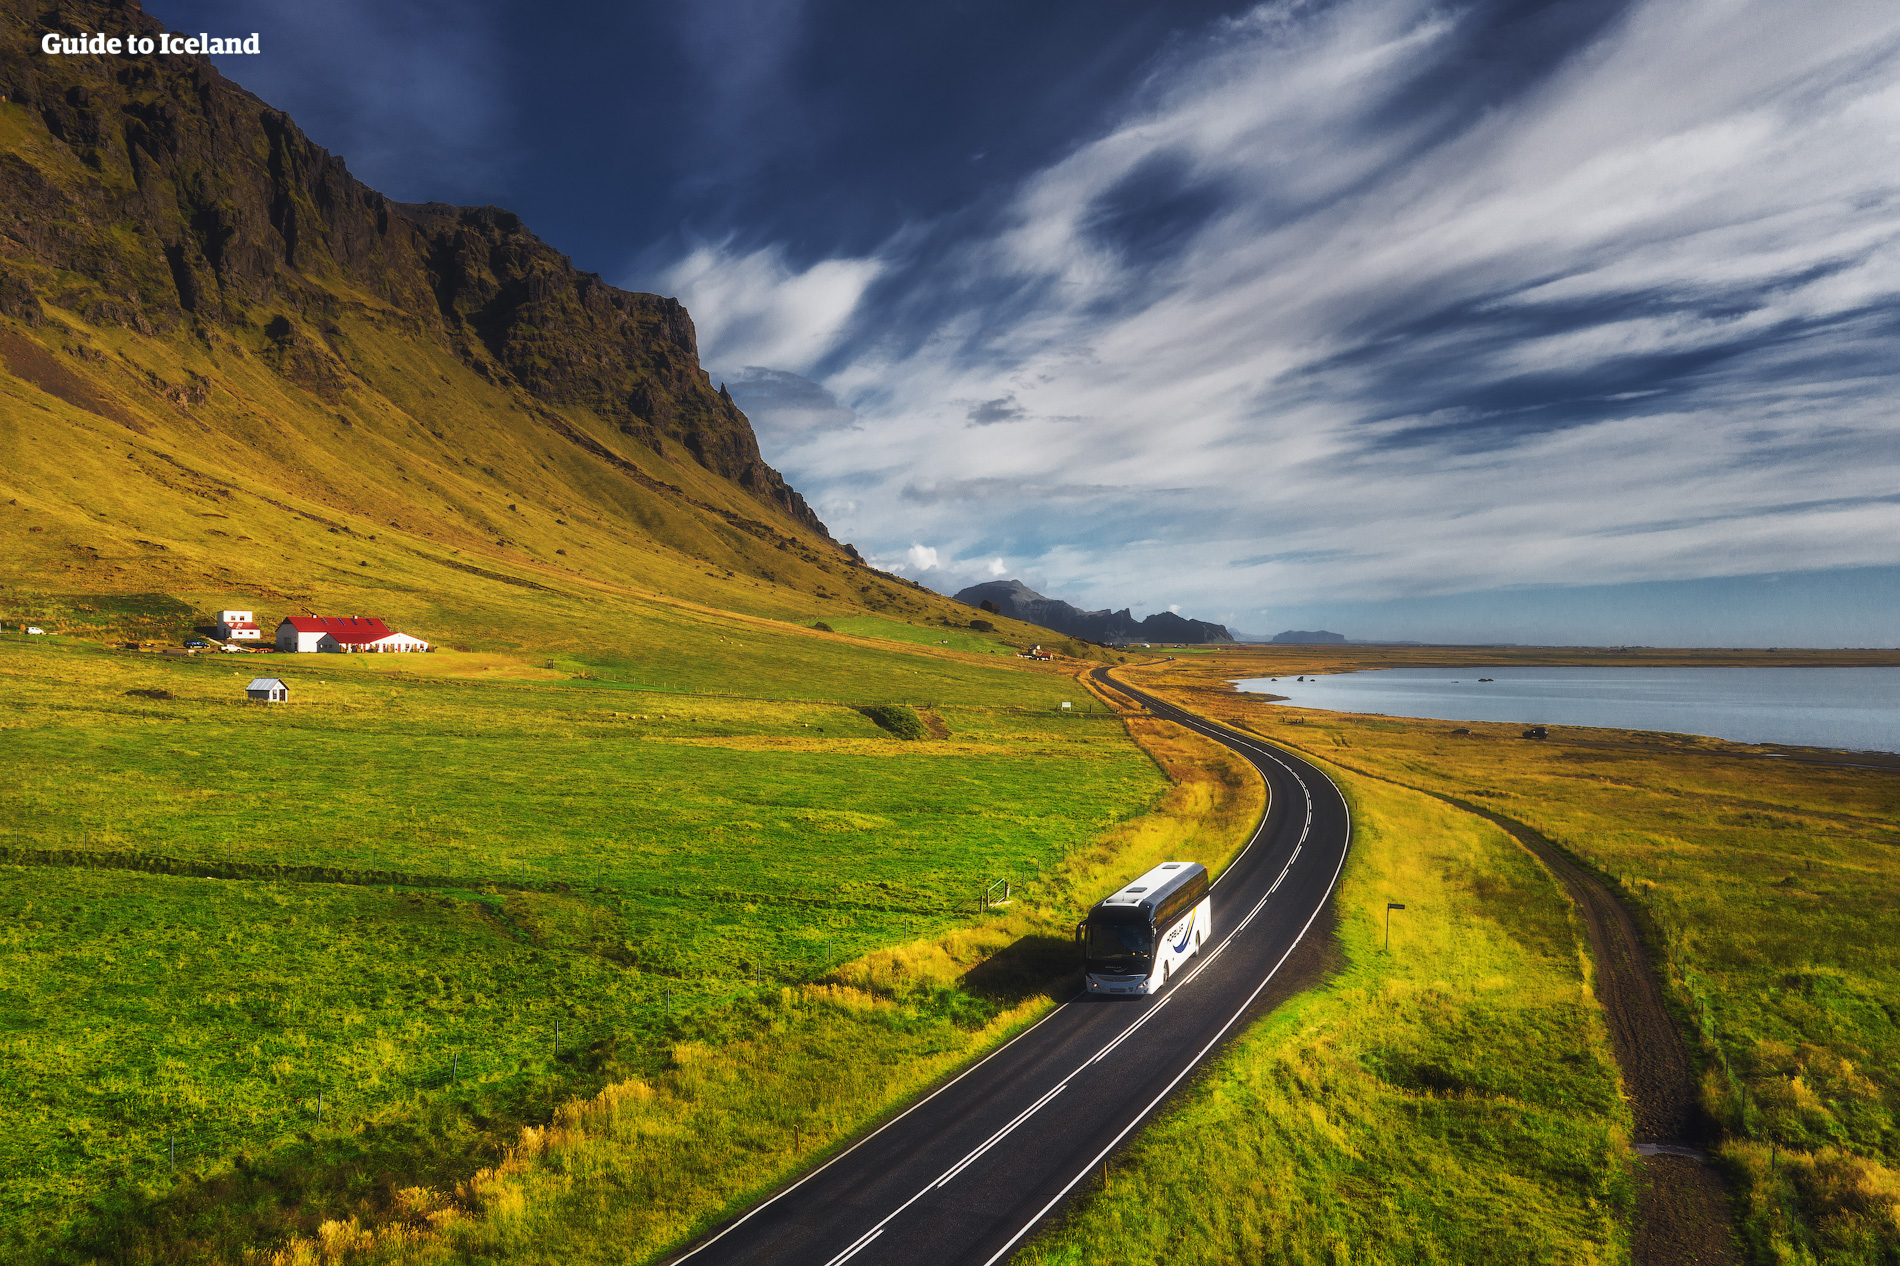 A self-drive in Iceland is a nice way to see the country